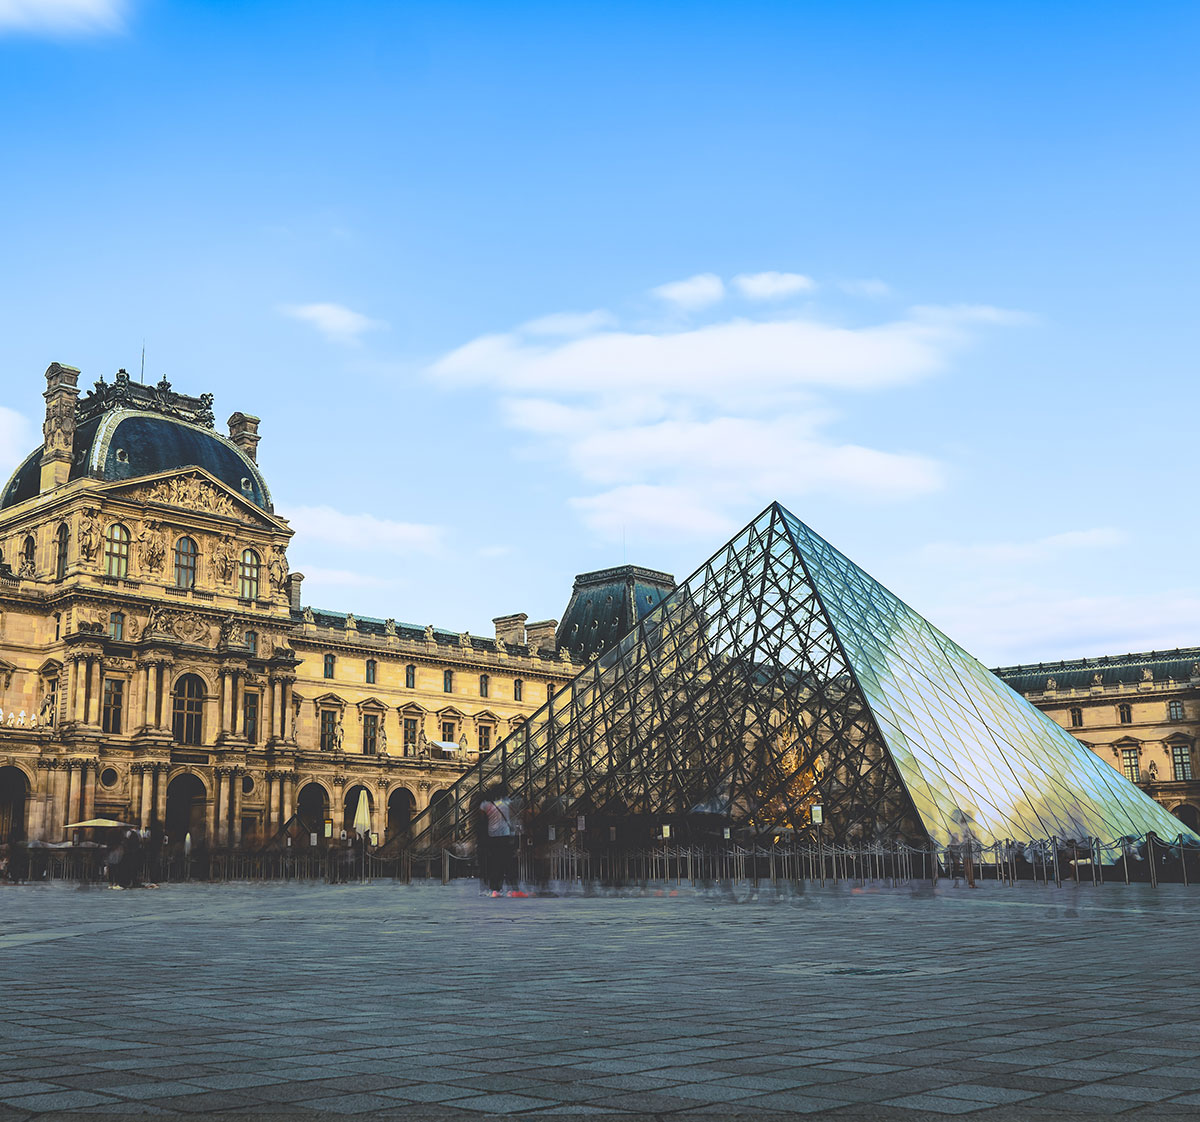 The Louvre Pyramid in Paris, France.